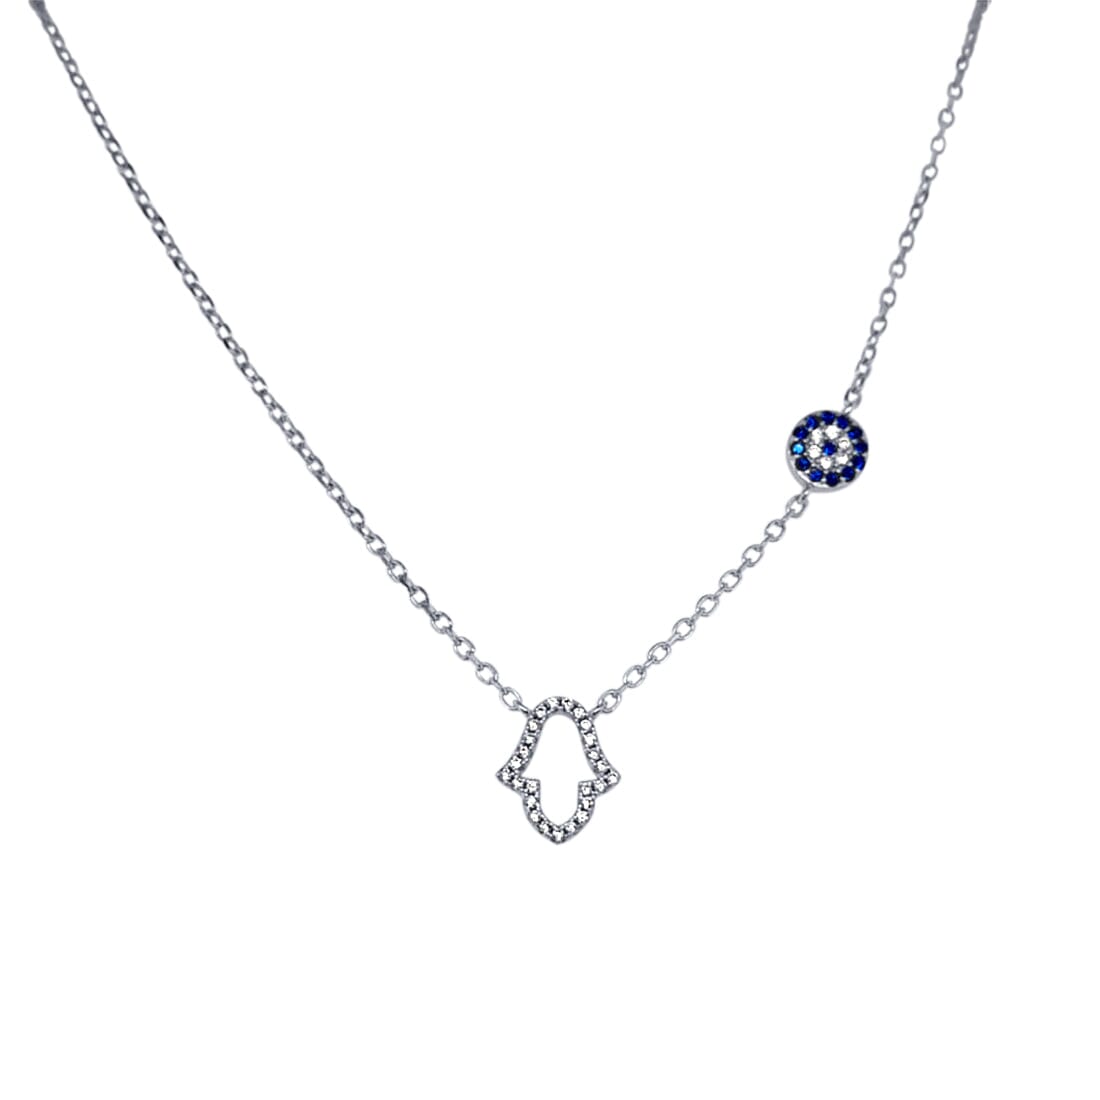 45cm Open Hamsa and Evil Eye Necklace with Cubic Zirconia in Sterling Silver Necklaces Bevilles 